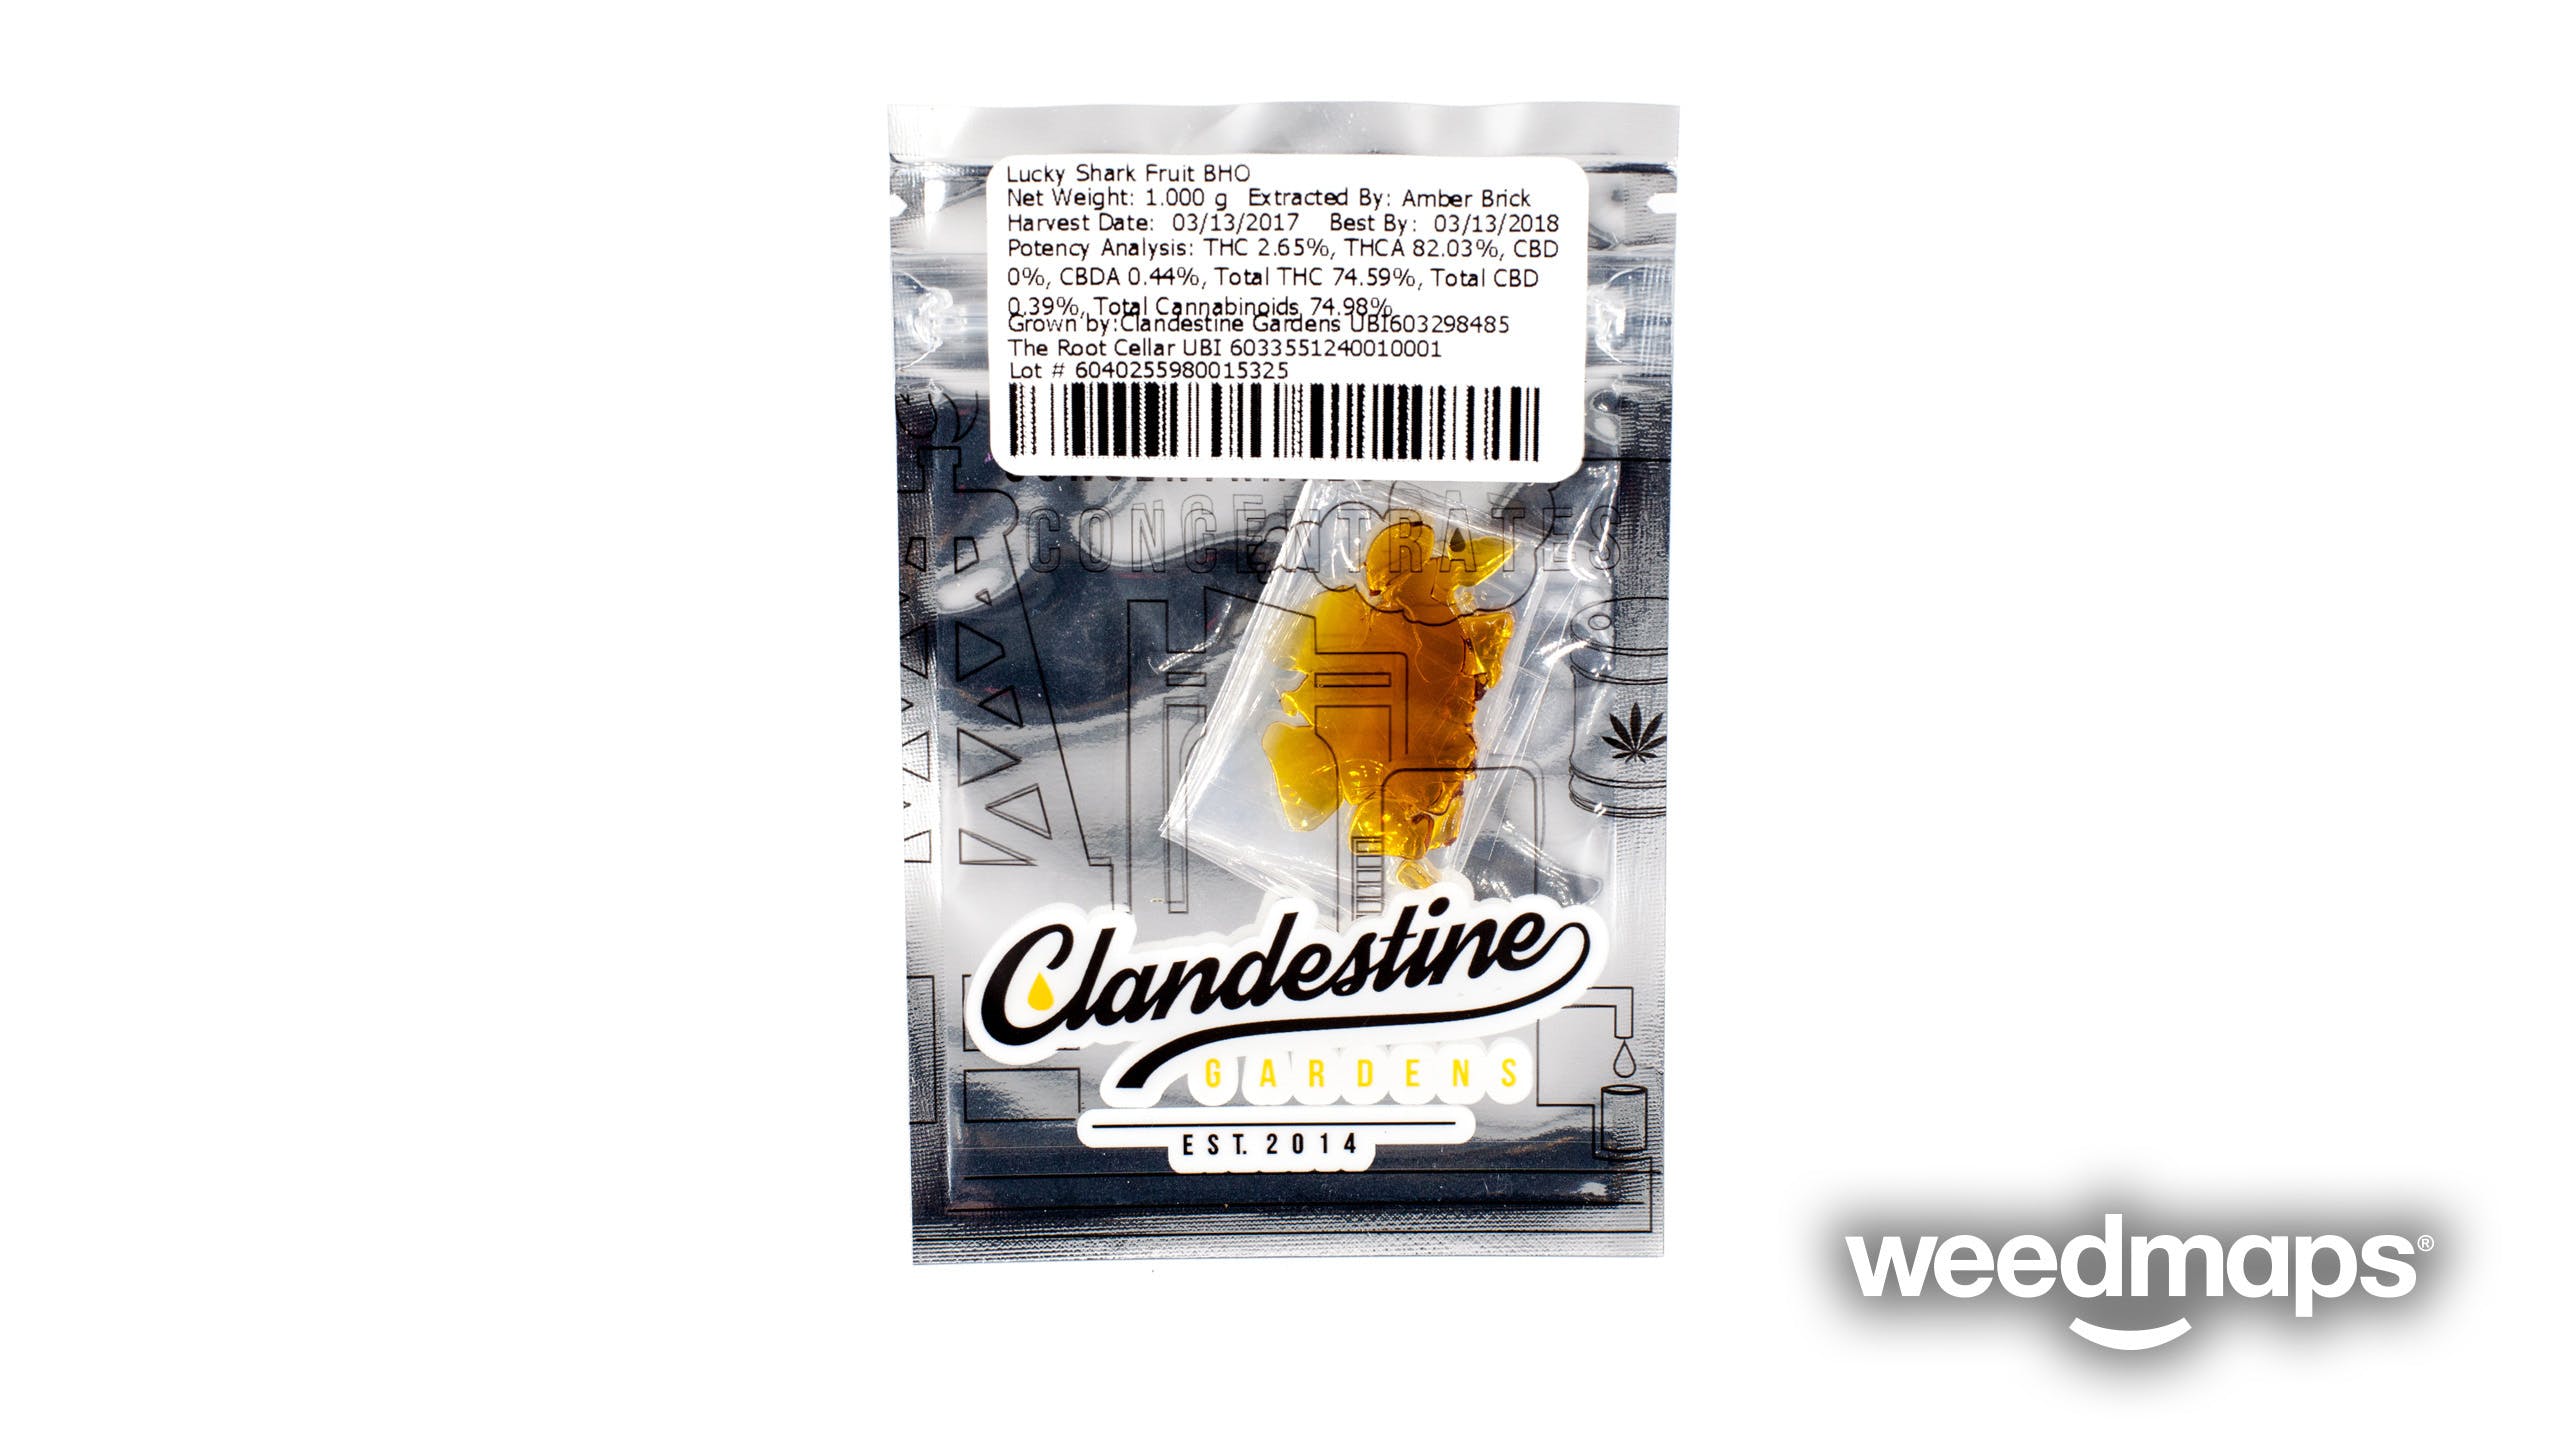 wax-clandestine-consulting-3bextract-3blucky-shark-fruit-bho-1g